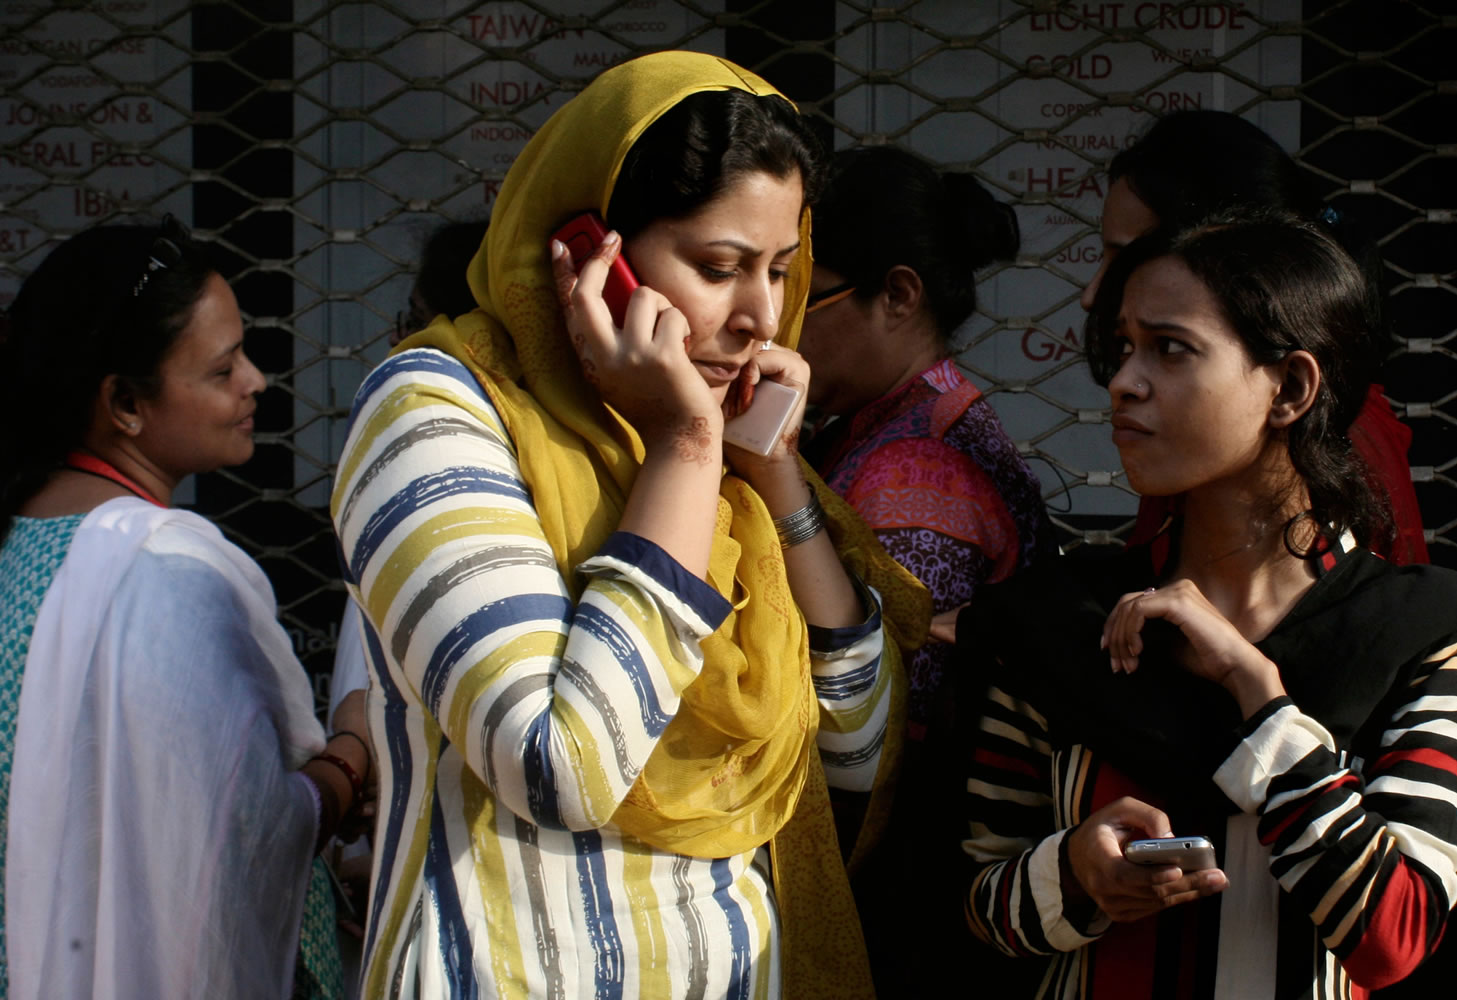 A Pakistani woman speaks on her mobile phone after rushing out of her apartment following a major earthquake that struck Baluchistan province in southwest Pakistan 430 miles from Karachi, Pakistan, on Tuesday.